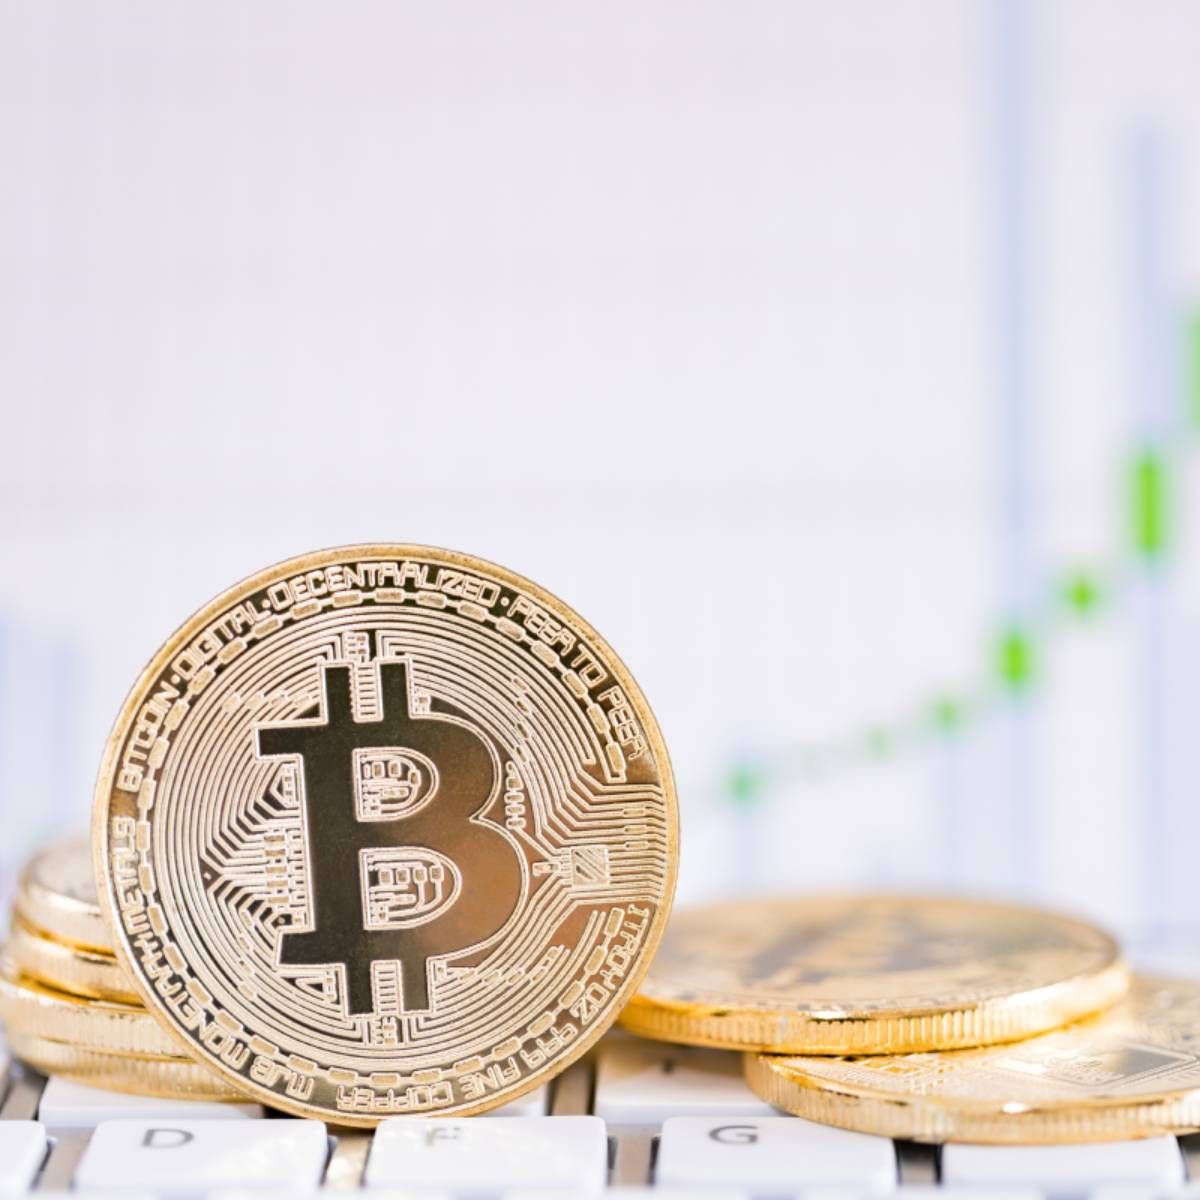 Pile of bitcoins with image of stocks in the background